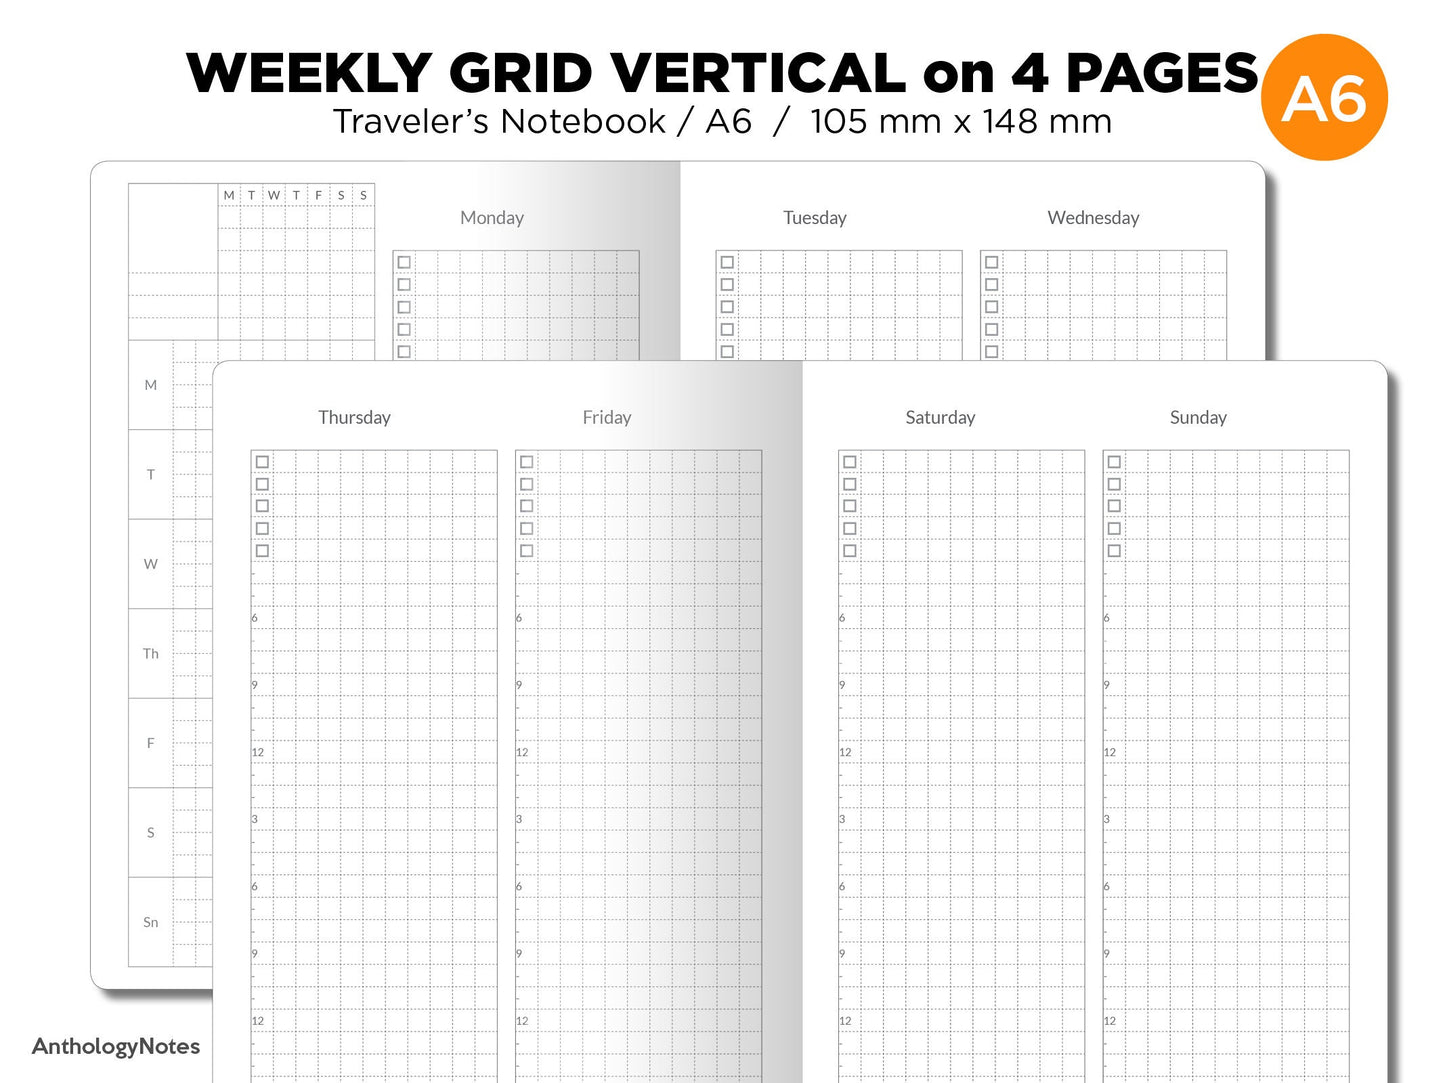 A6 Weekly VERTICAL GRID Traveler's Notebook Wo4P Minimalist Functional Insert TN Monday or Sunday Start